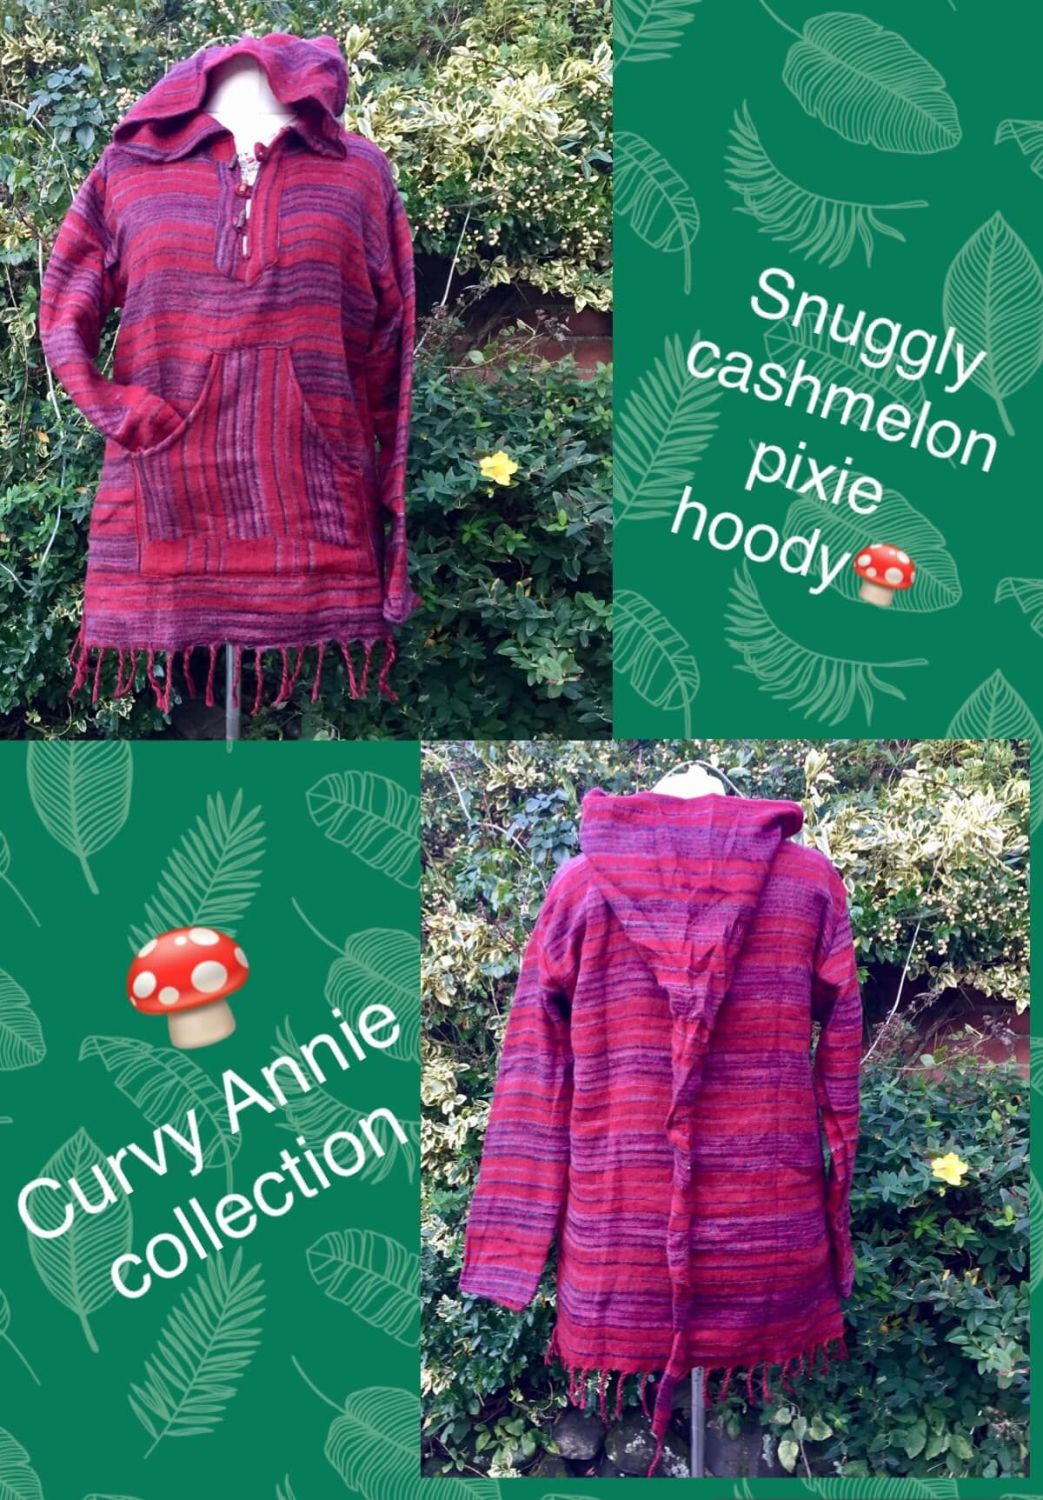 Snuggly cashmelon pixie hooded  top